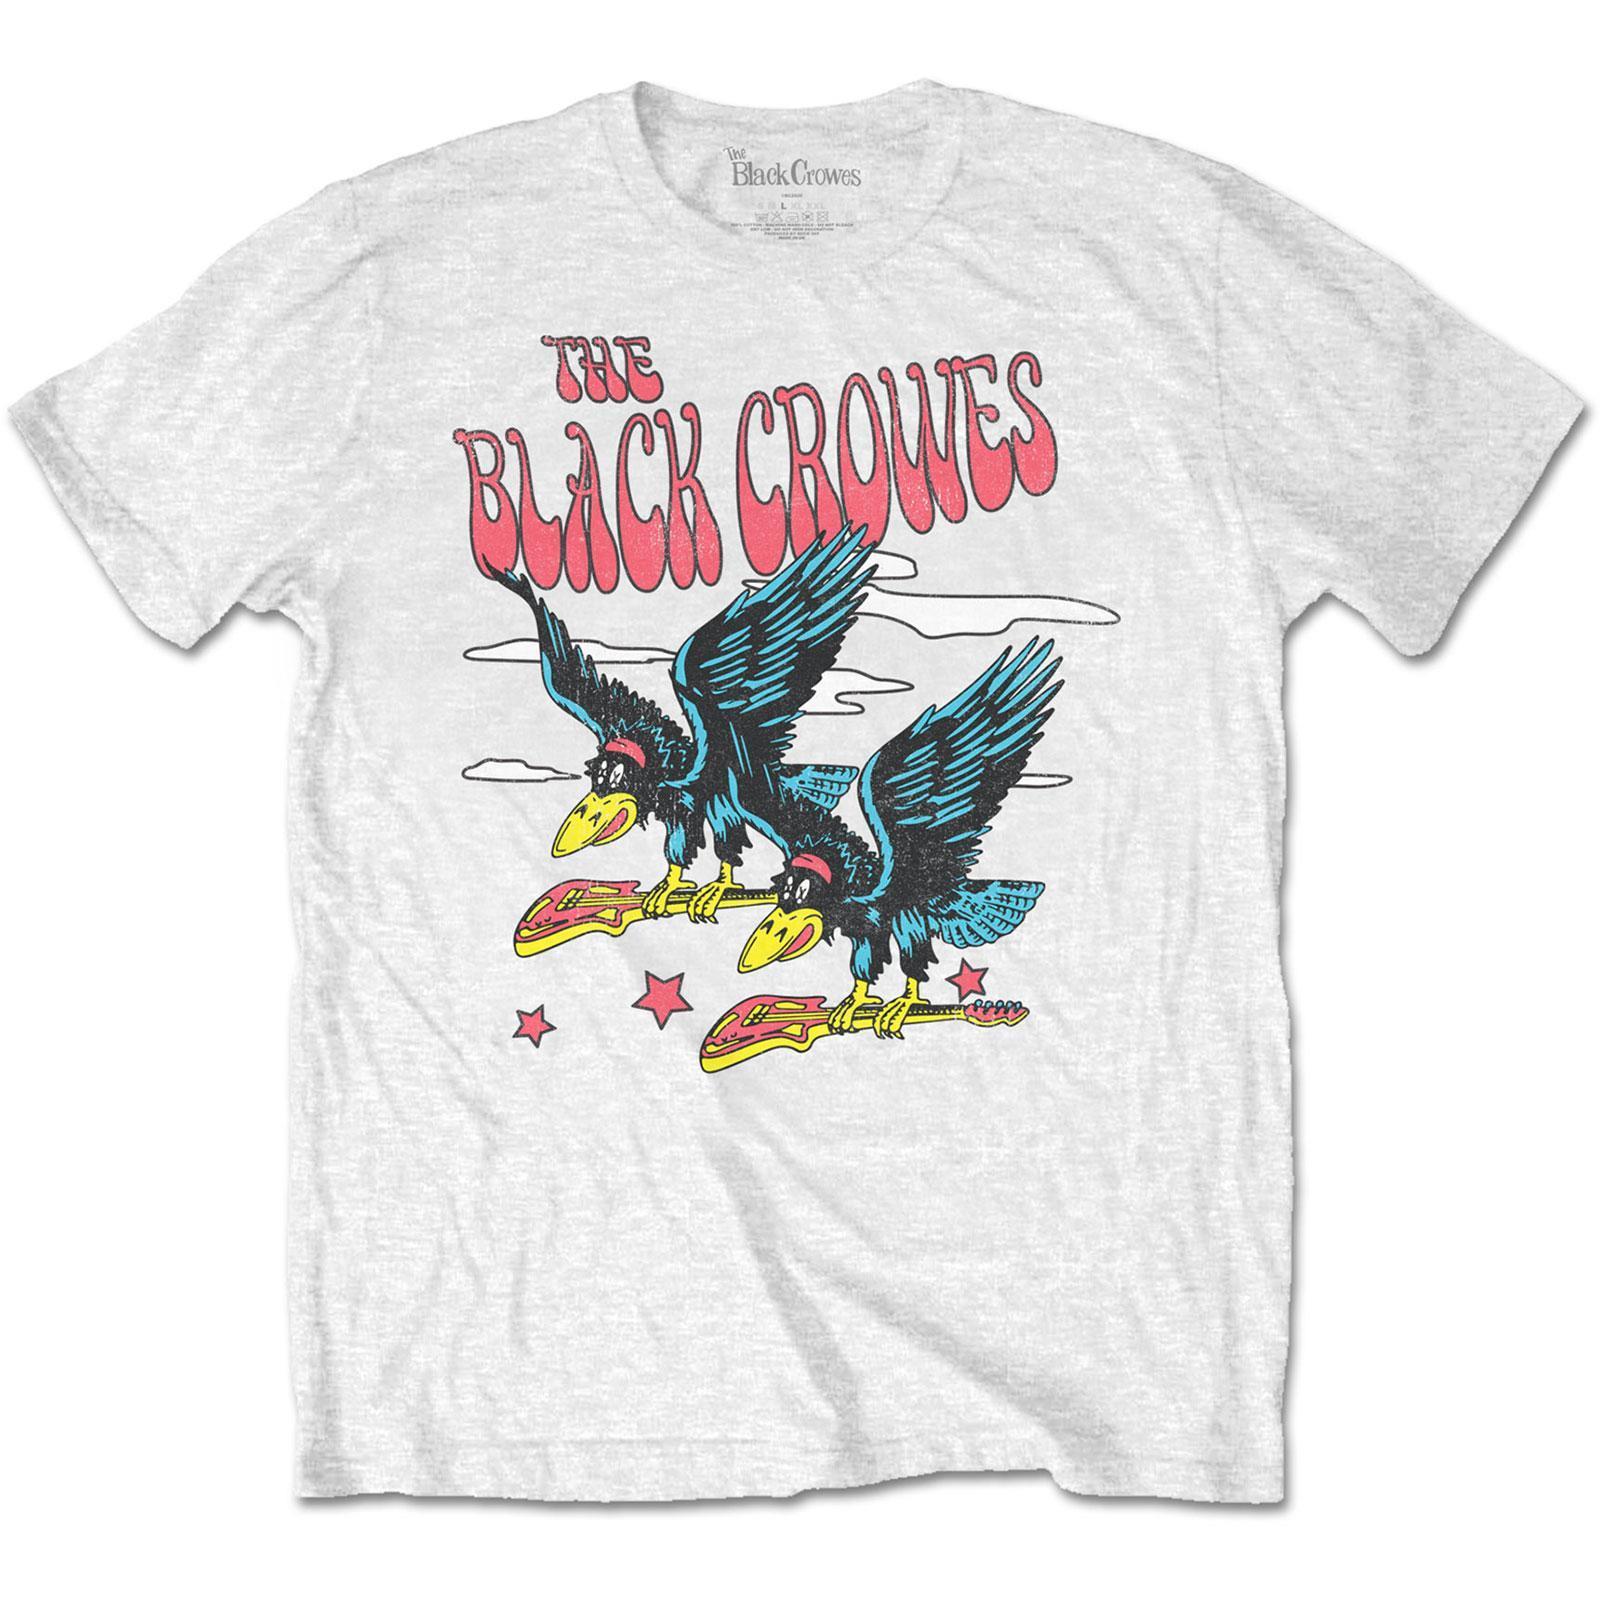 The Black Crowes Unisex Adult Flying Crowes T-Shirt (White) (3XL)